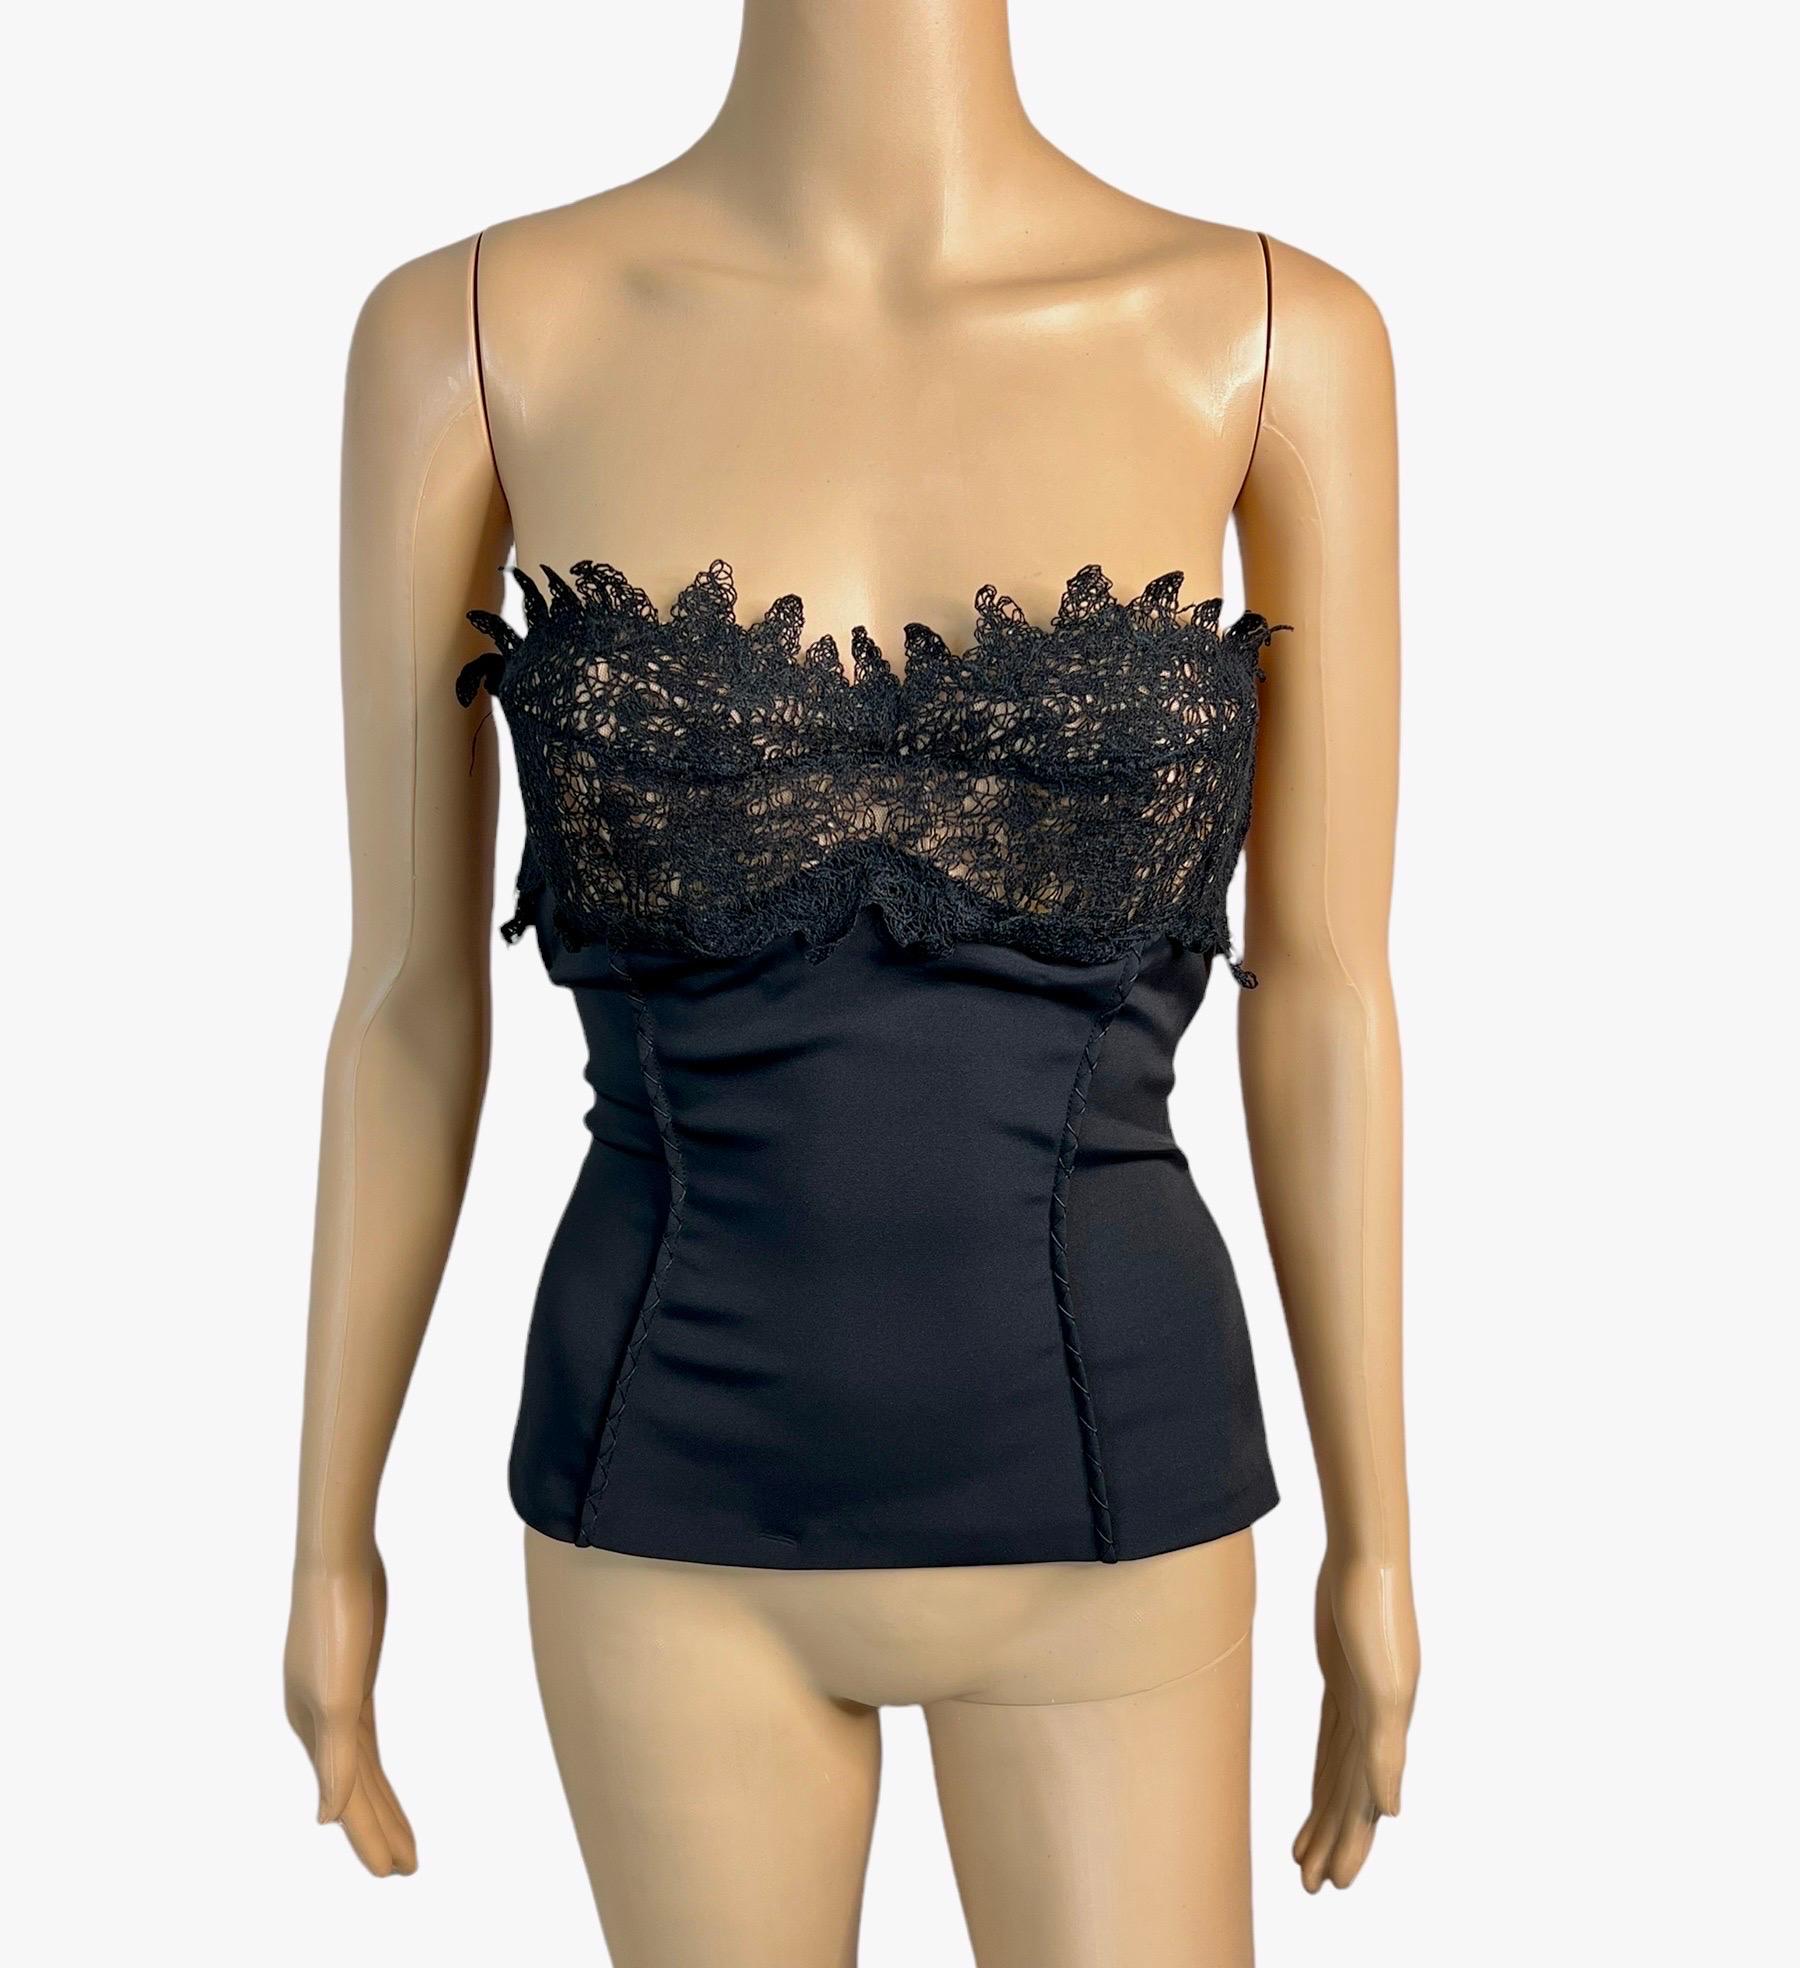 Versace F/W 2003 Strapless Lace Bustier Bra Black Corset Top  In Good Condition For Sale In Naples, FL